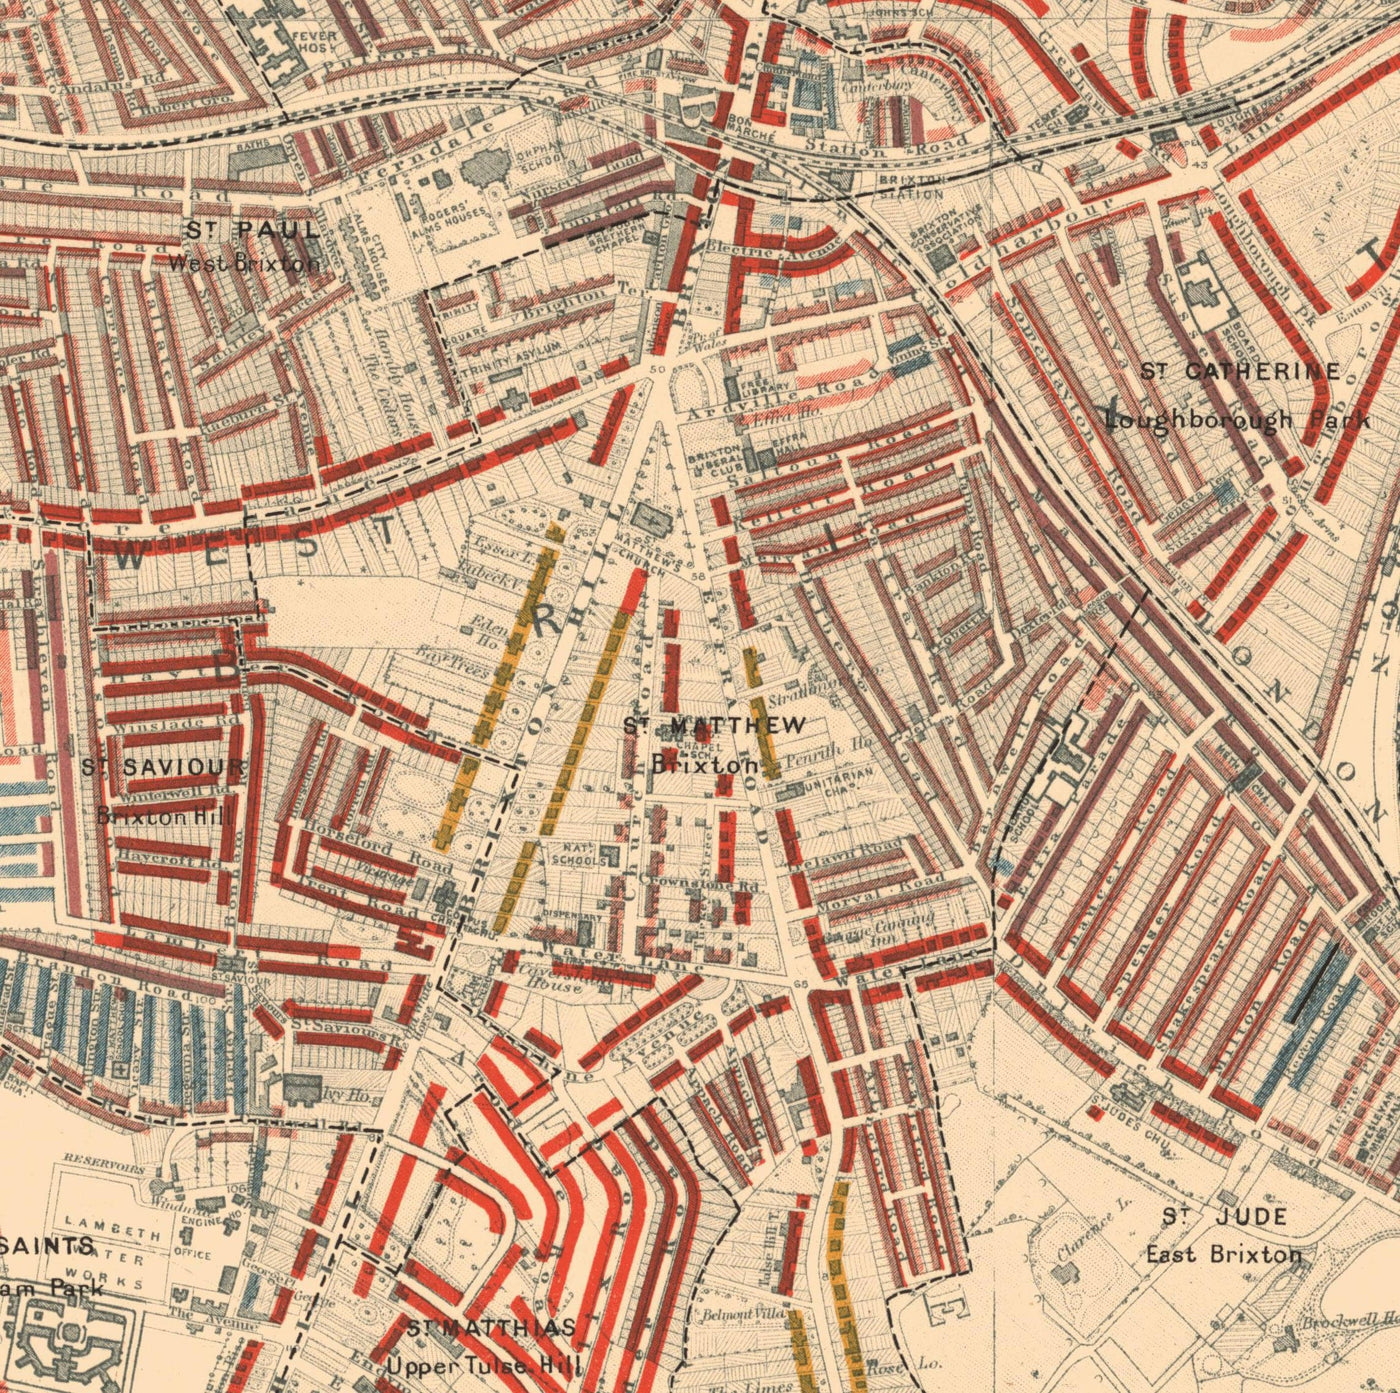 Large Old Map of London - 1746, 1788, 1830 or 1862. Big custom map up to 4 metres (13ft)